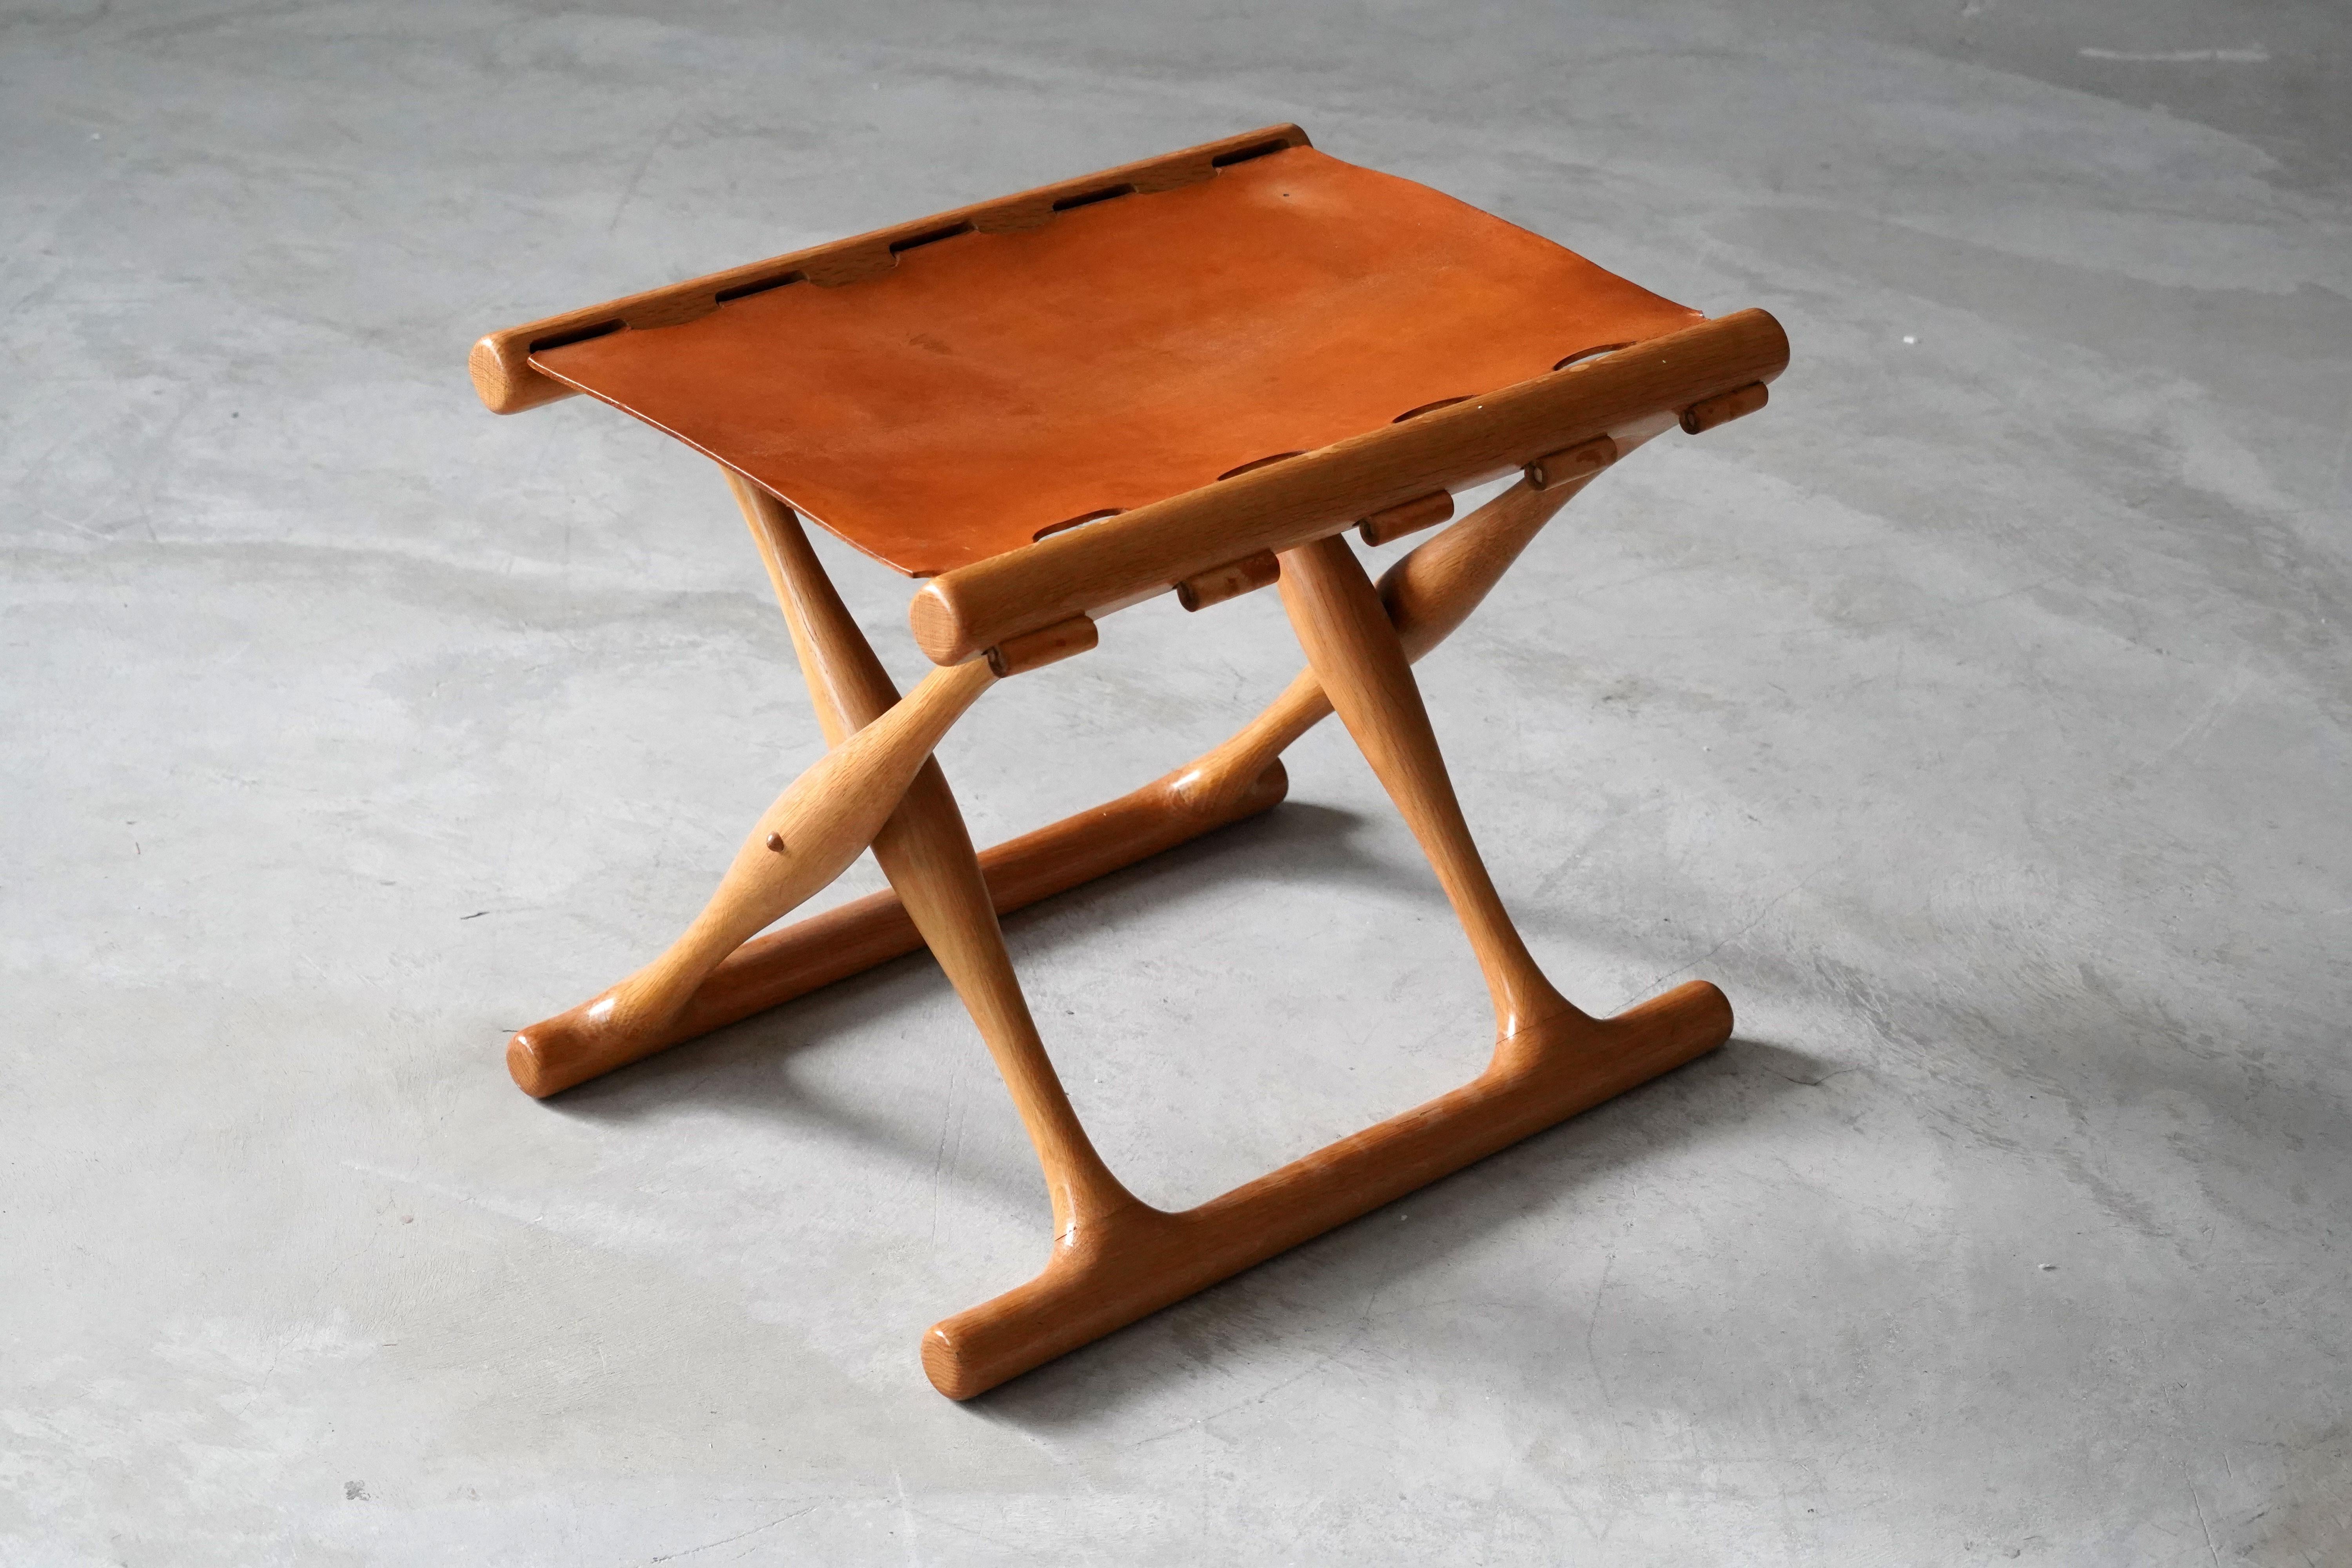 An early production “Guldhøj” folding stool, designed by Poul Hundevad and produced in the studio of the artist. Executed in finely sculpted oak and original natural leather. 

Other designers of the period include Kaare Klint, Ole Wanscher, Finn